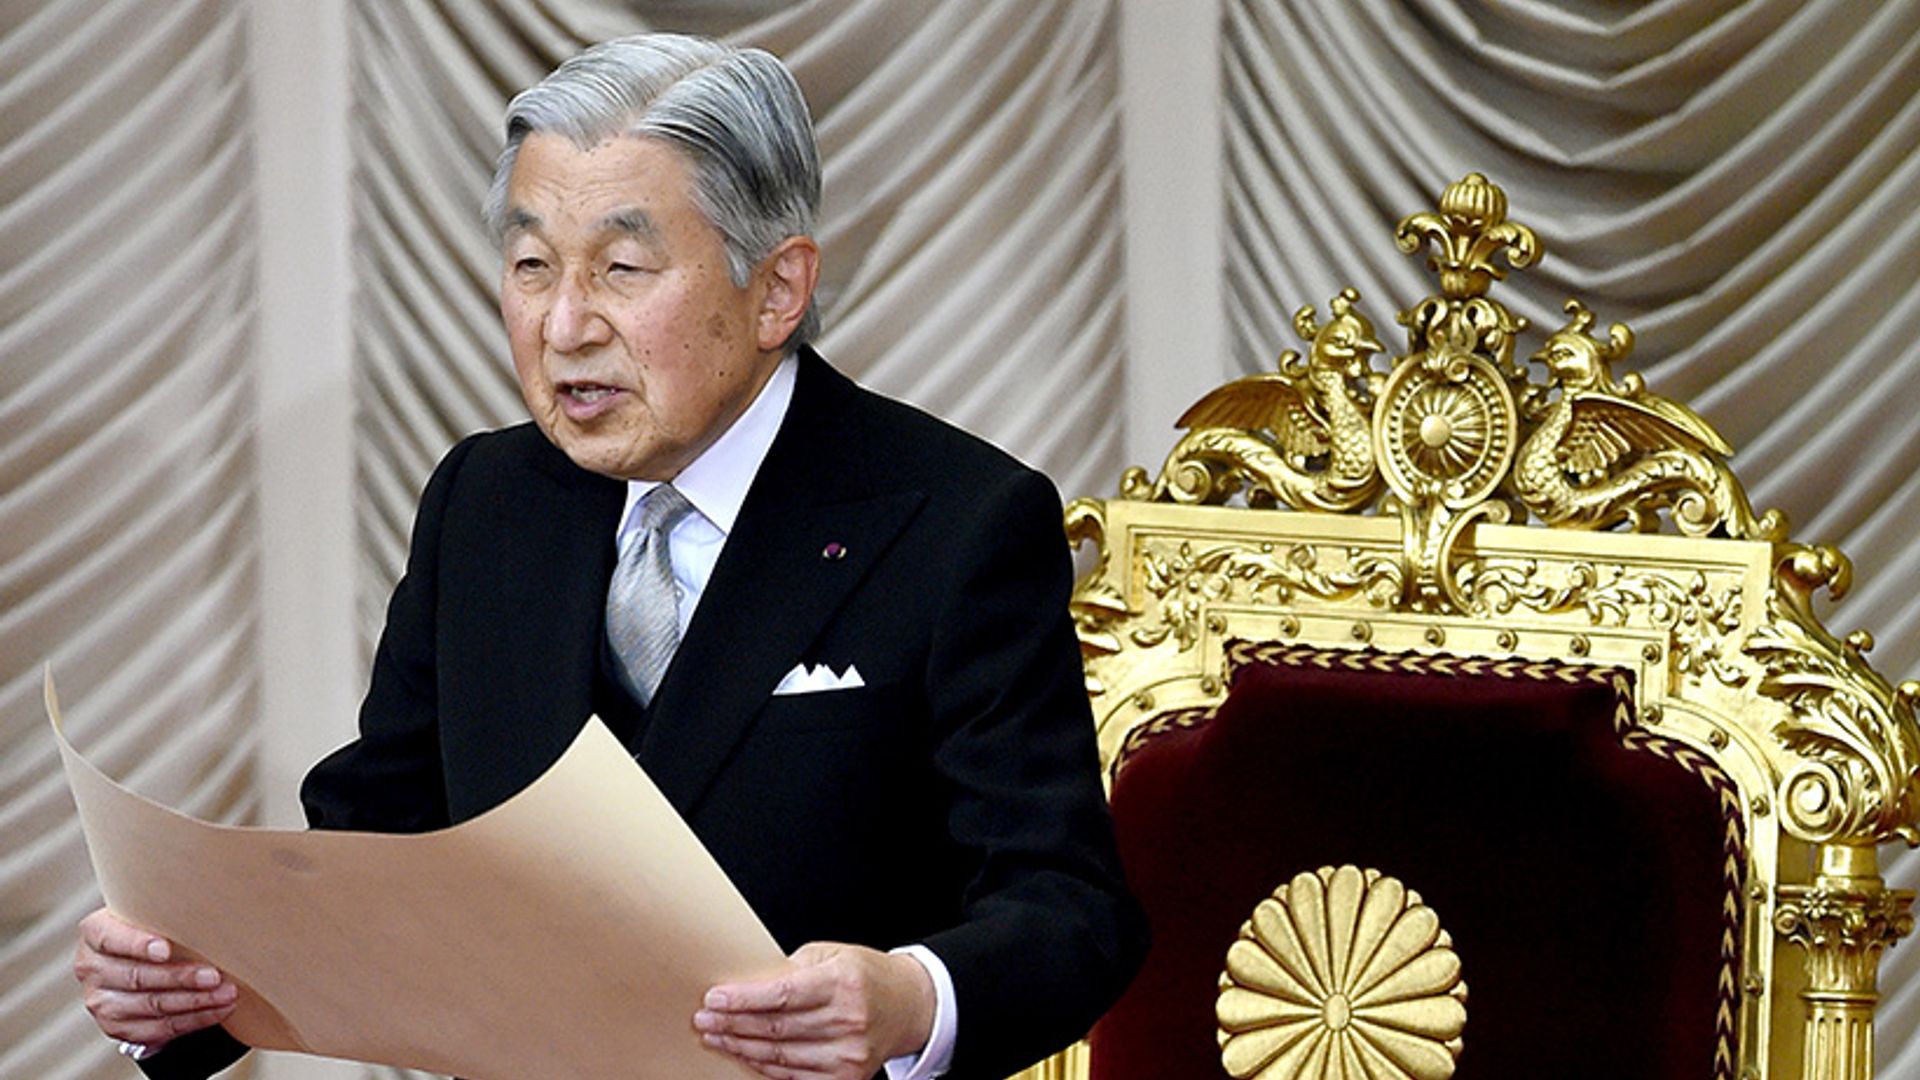 Japan's Emperor Akihito hints at wish to abdicate in rare TV address